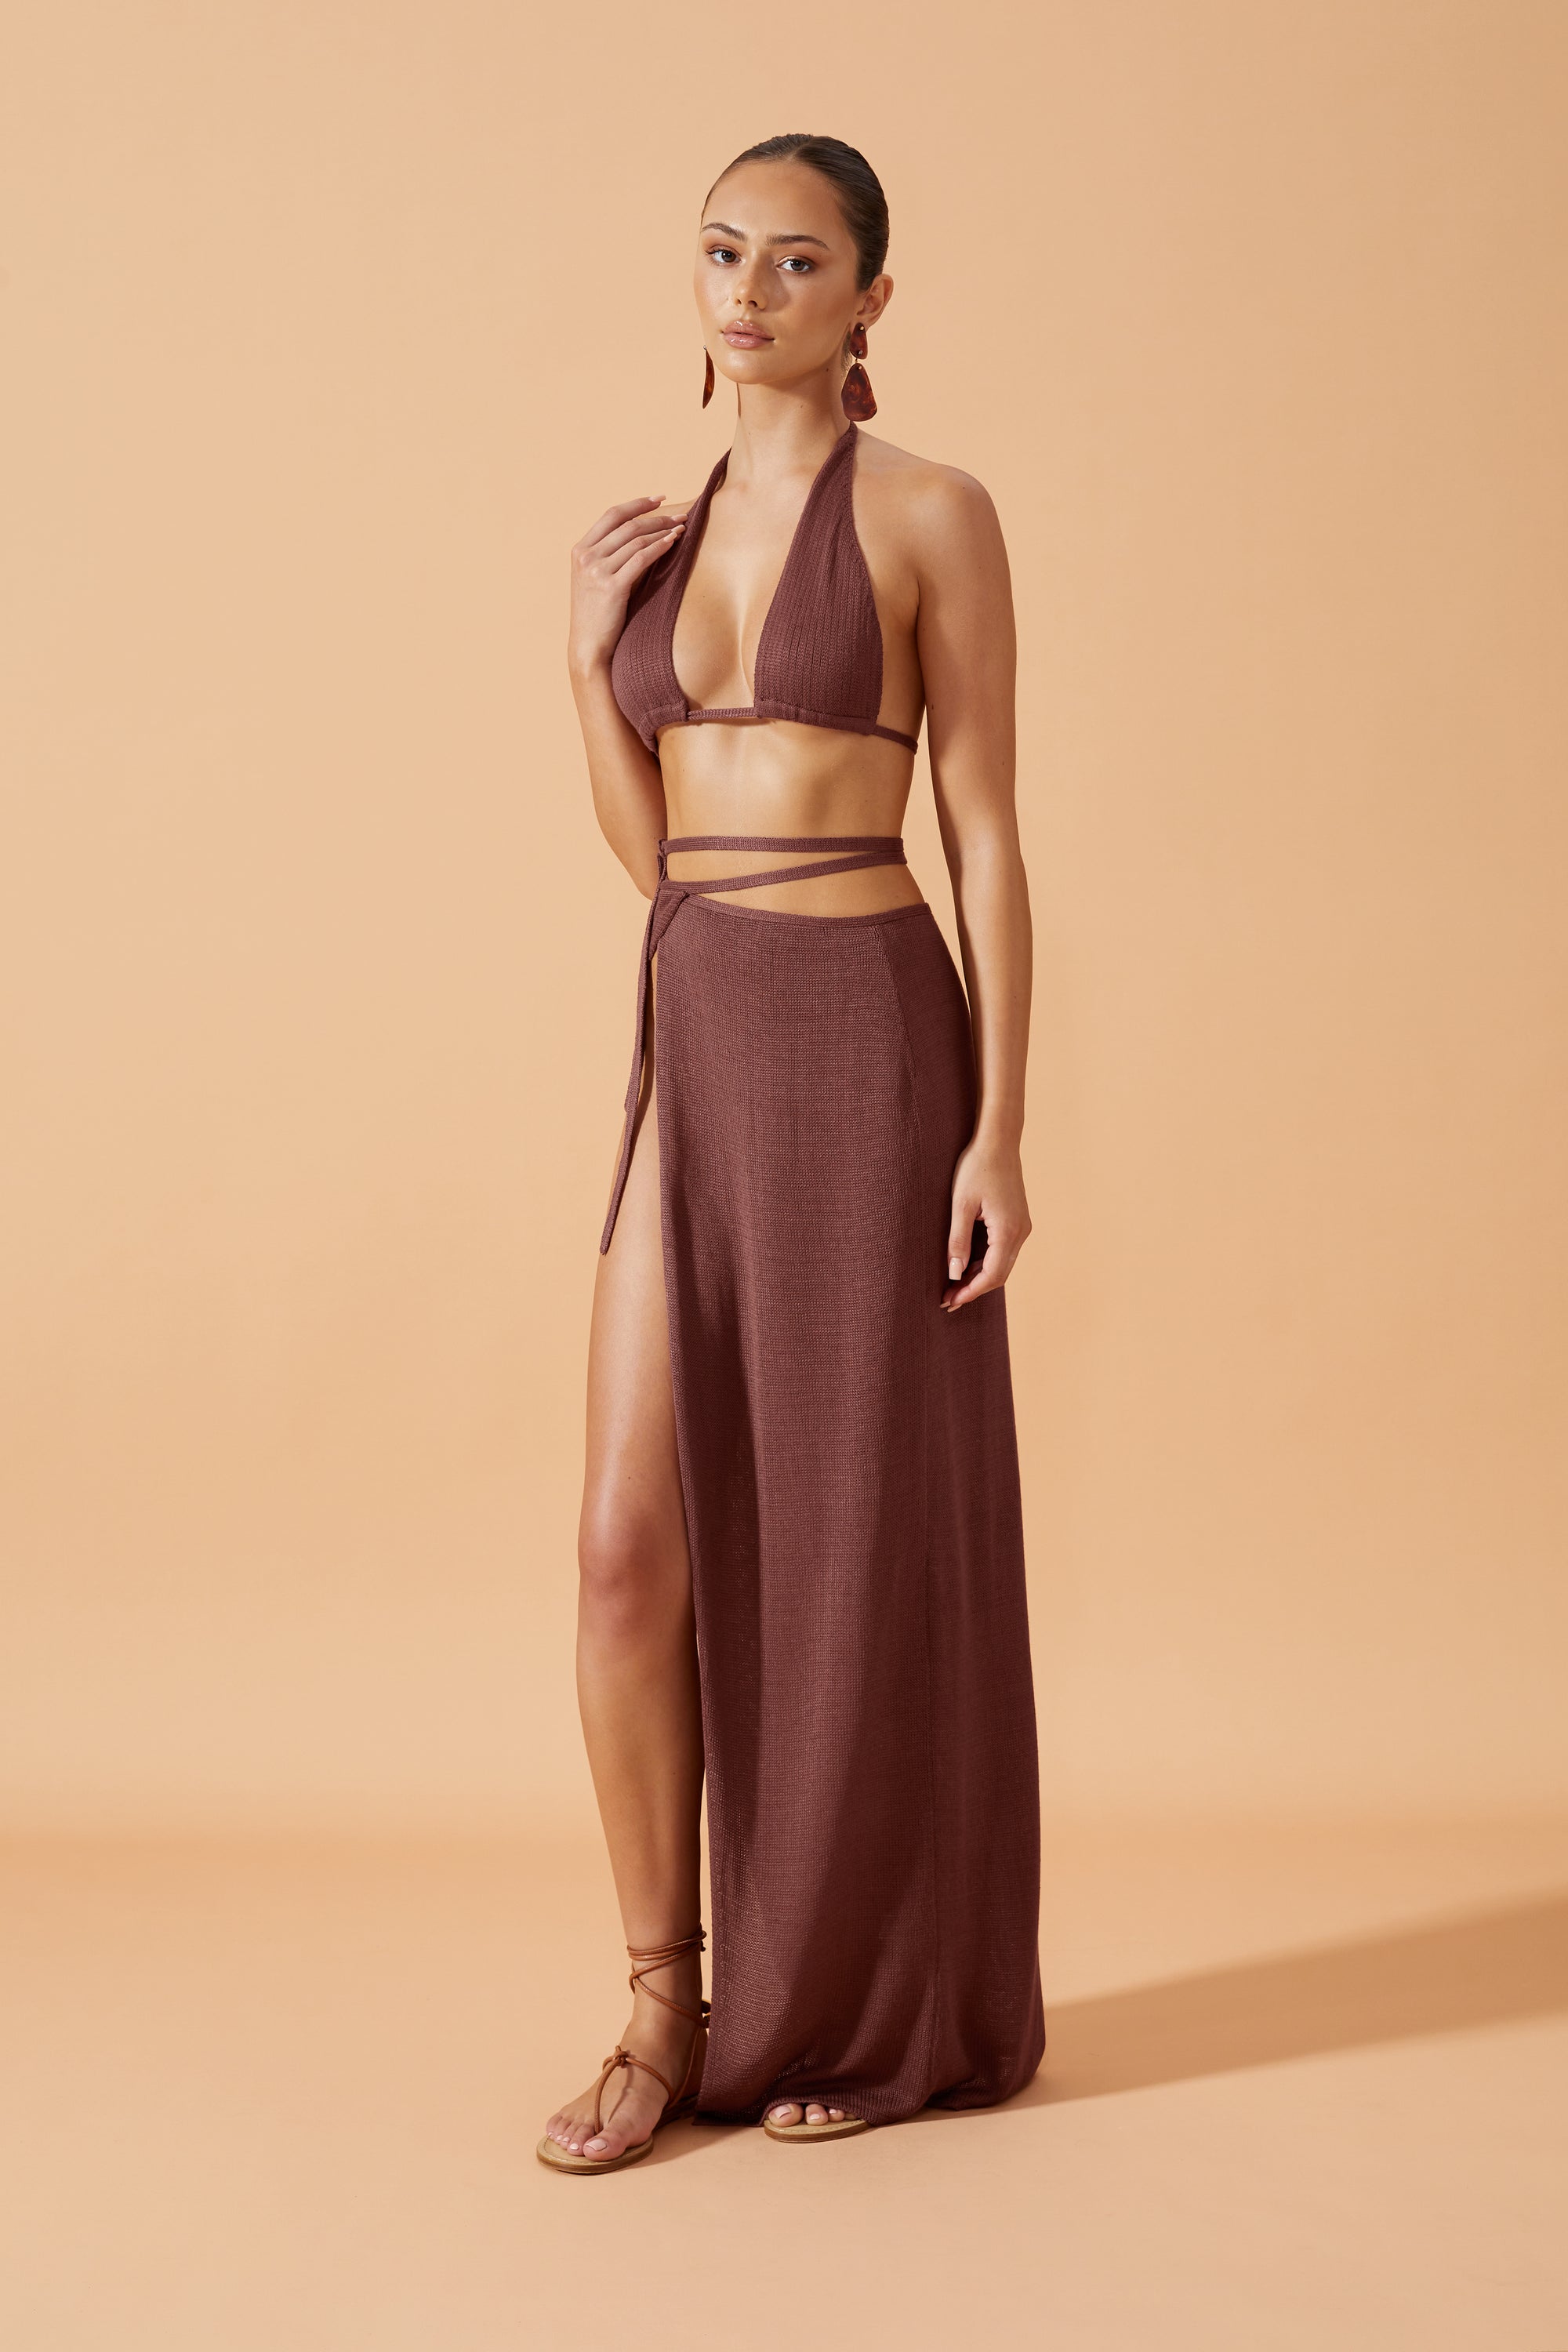 Flook The Label  Zula  Knitted Maxi Wrap Skirt in Coconut Husk. Matched with Zula  Knitted Top in Coconut Husk. Front View 